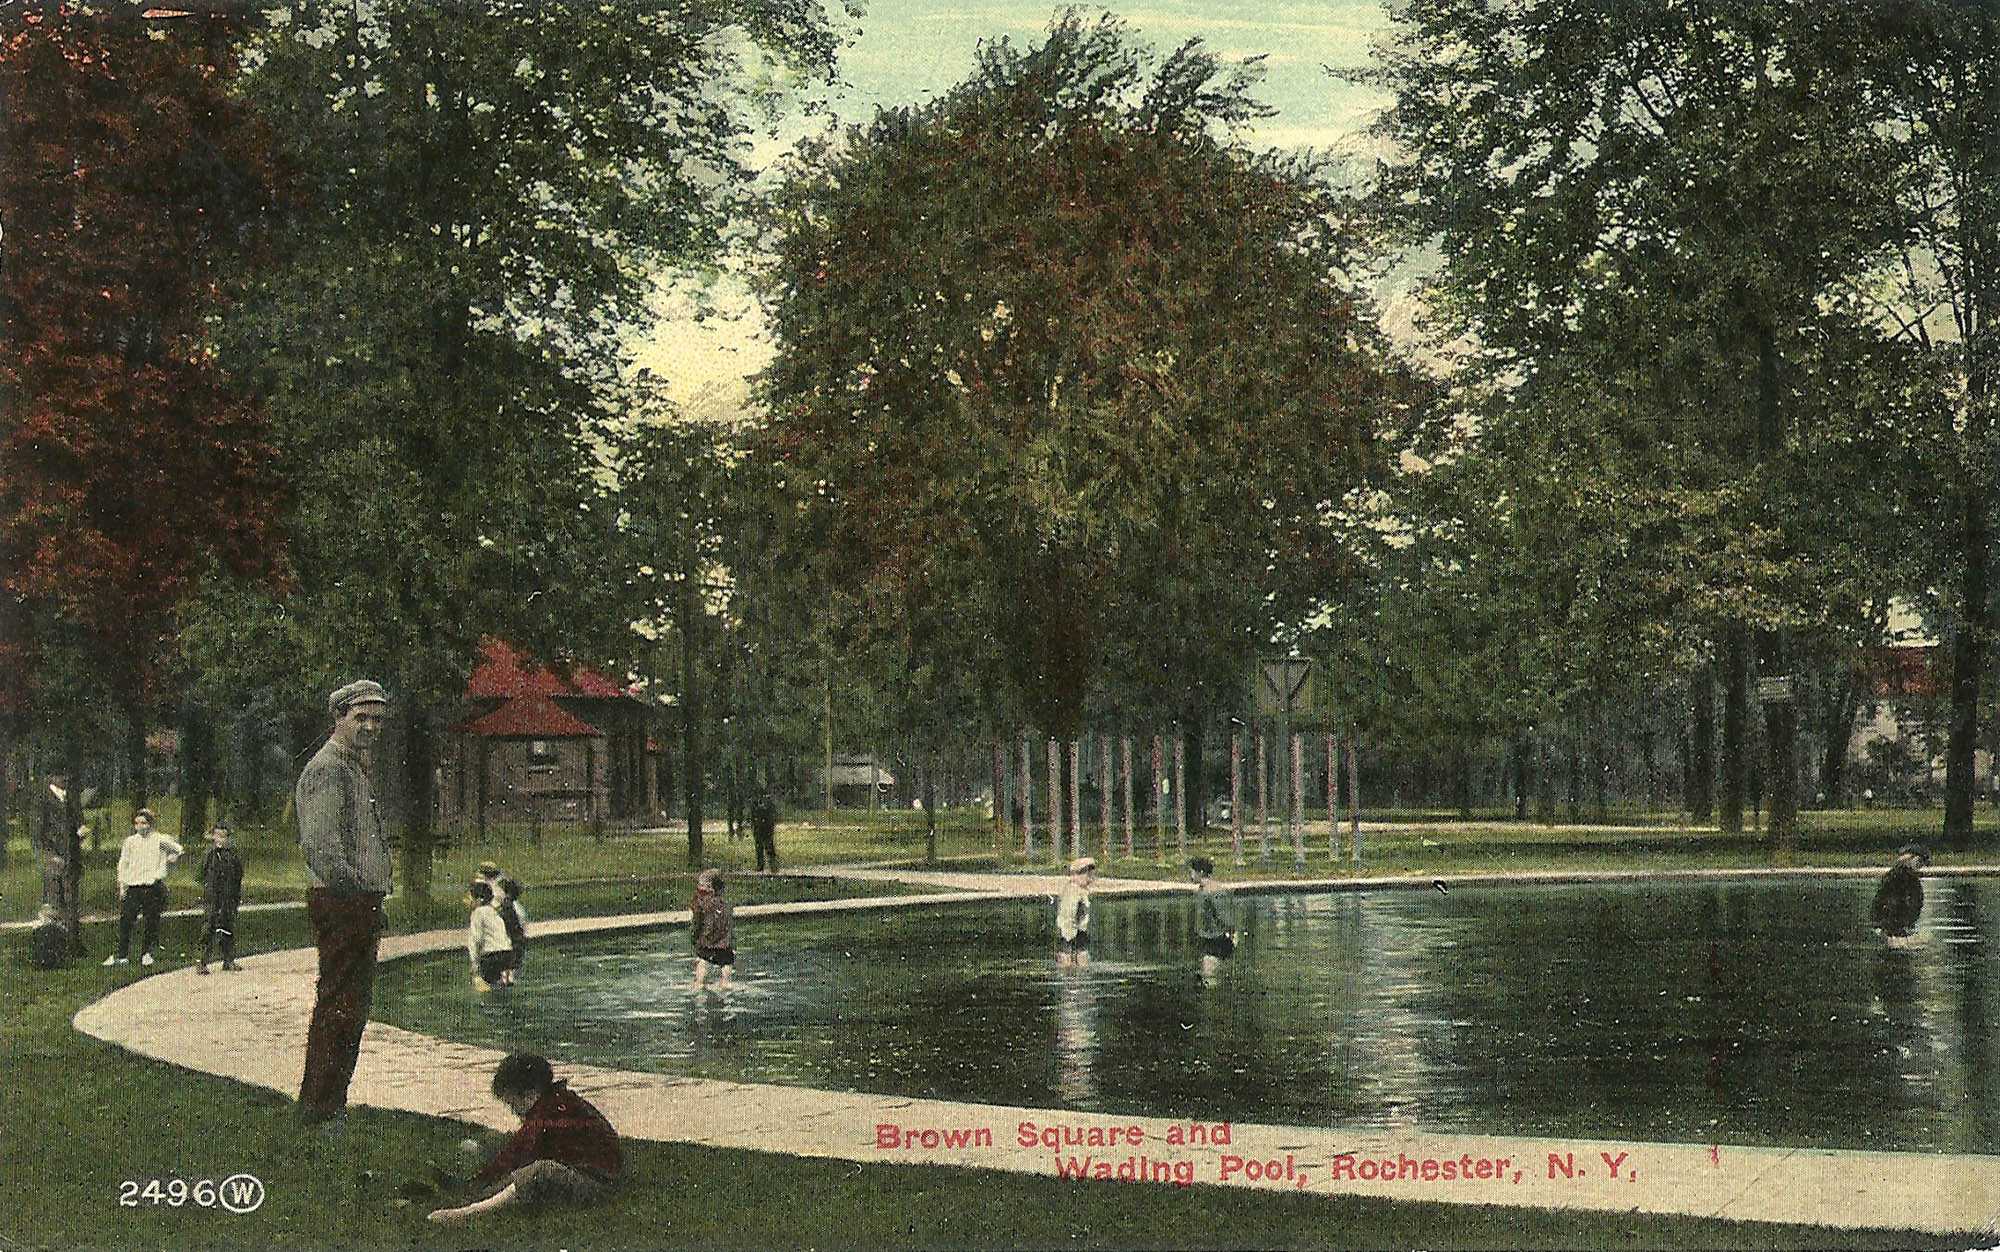 Brown's Square Park